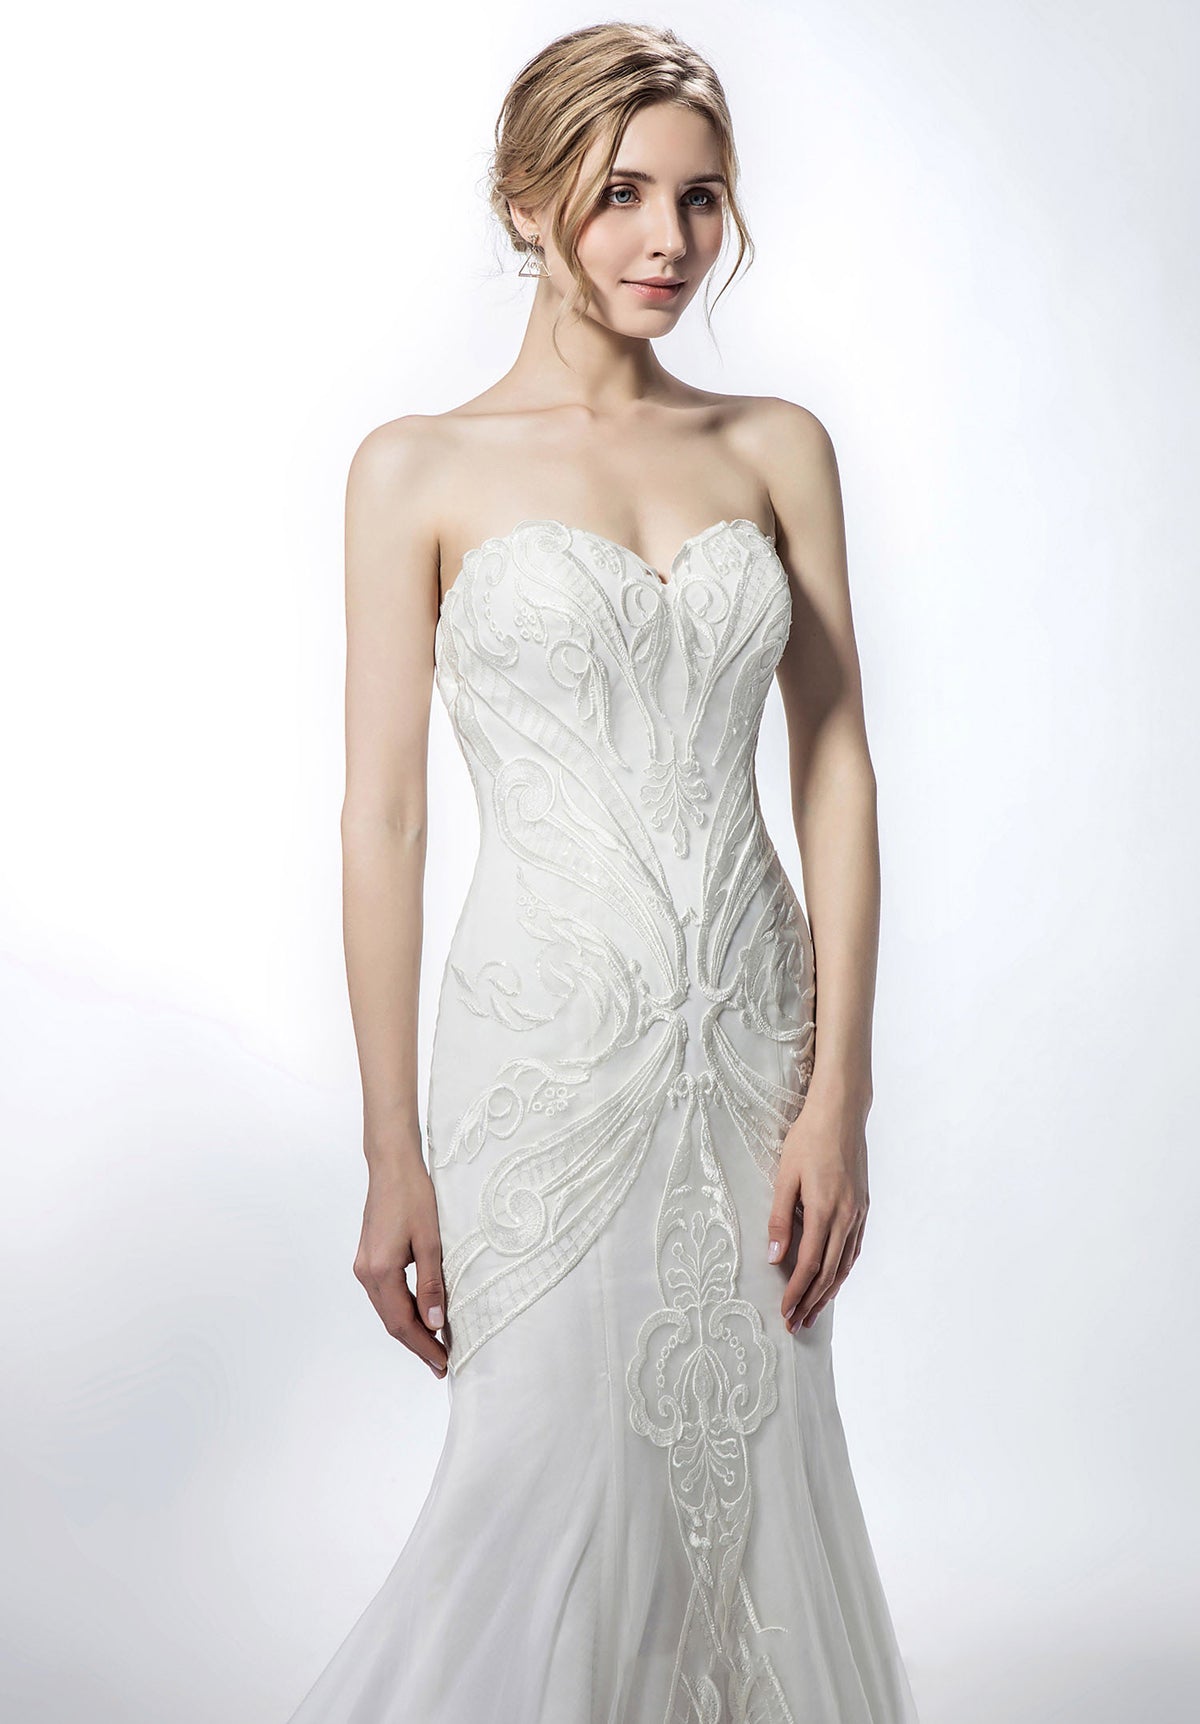 Elegant Strapless Fit and Flare Classic Wedding Dress